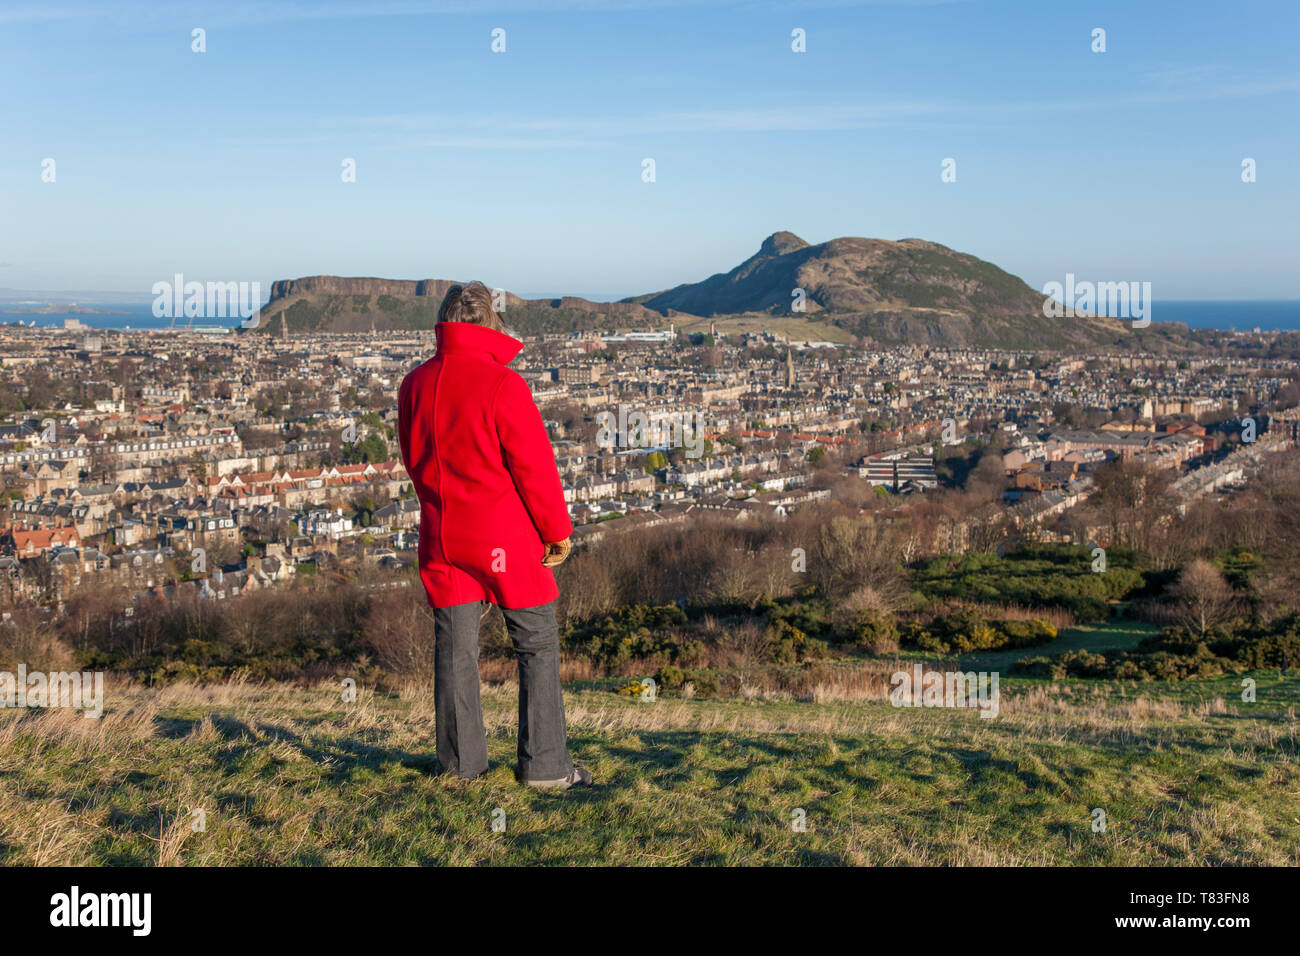 Edinburgh, City of Edinburgh, Scotland. Woman in red coat admiring the view from Blackford Hill over rooftops to Arthur's Seat. Stock Photo